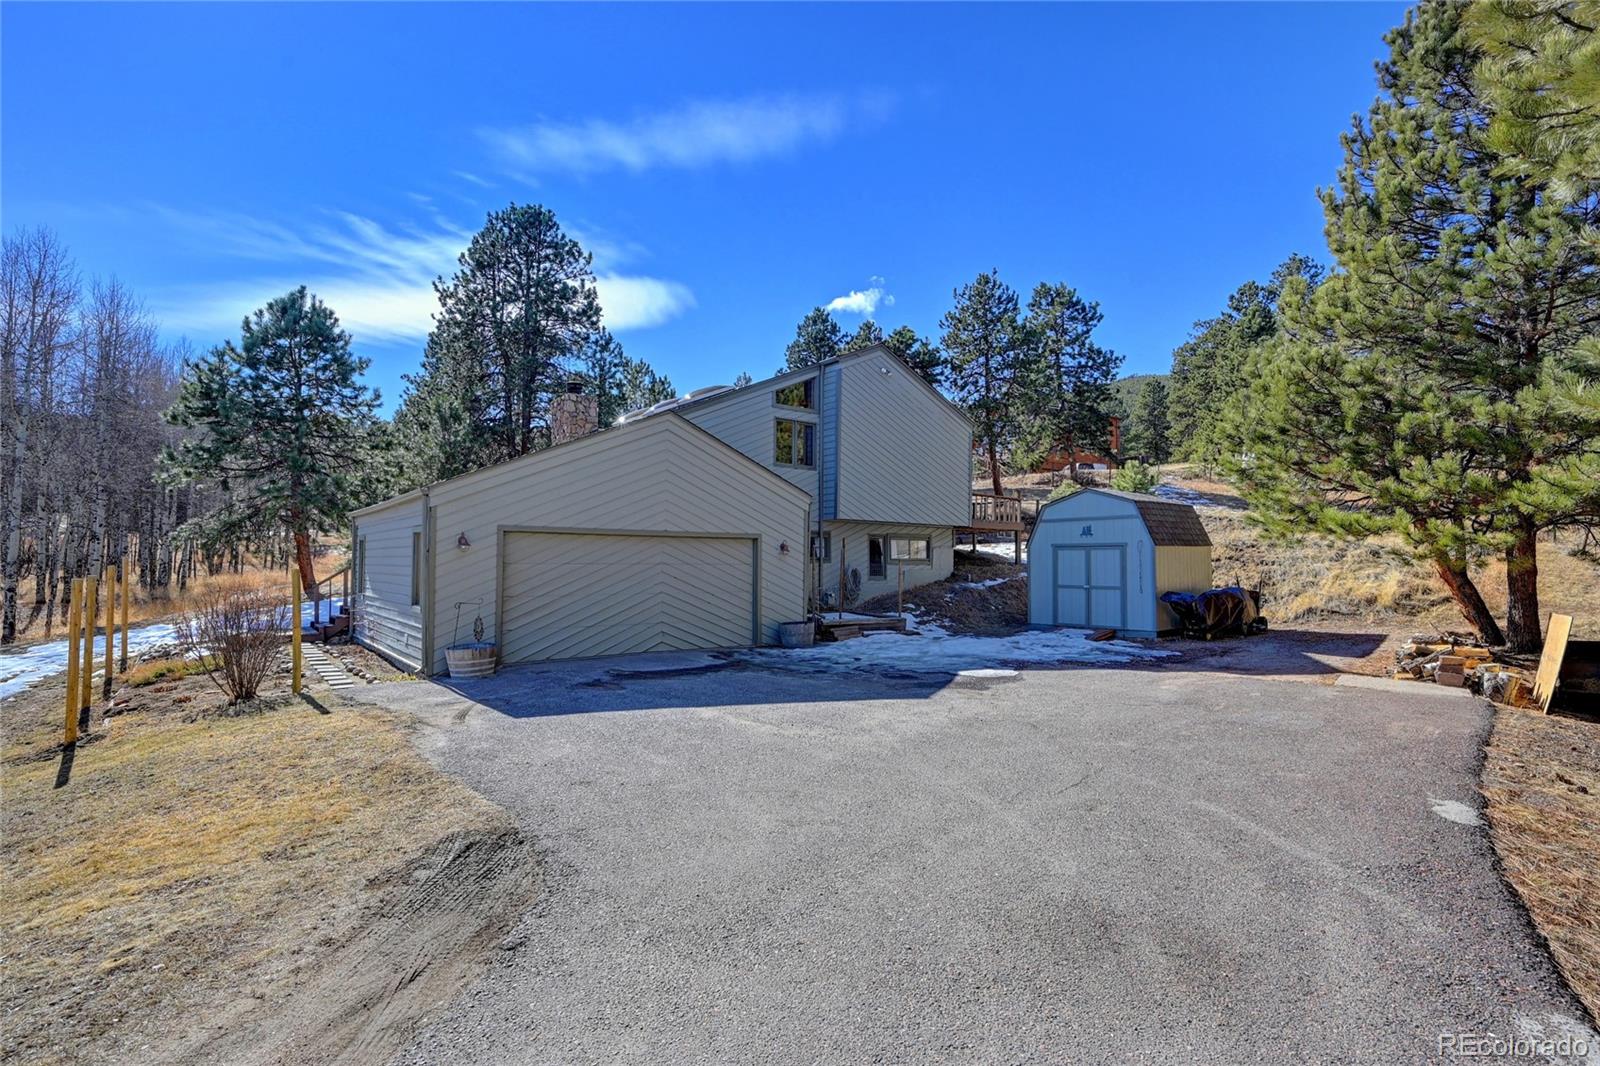 Report Image for 5615 S Hatch Drive,Evergreen, Colorado